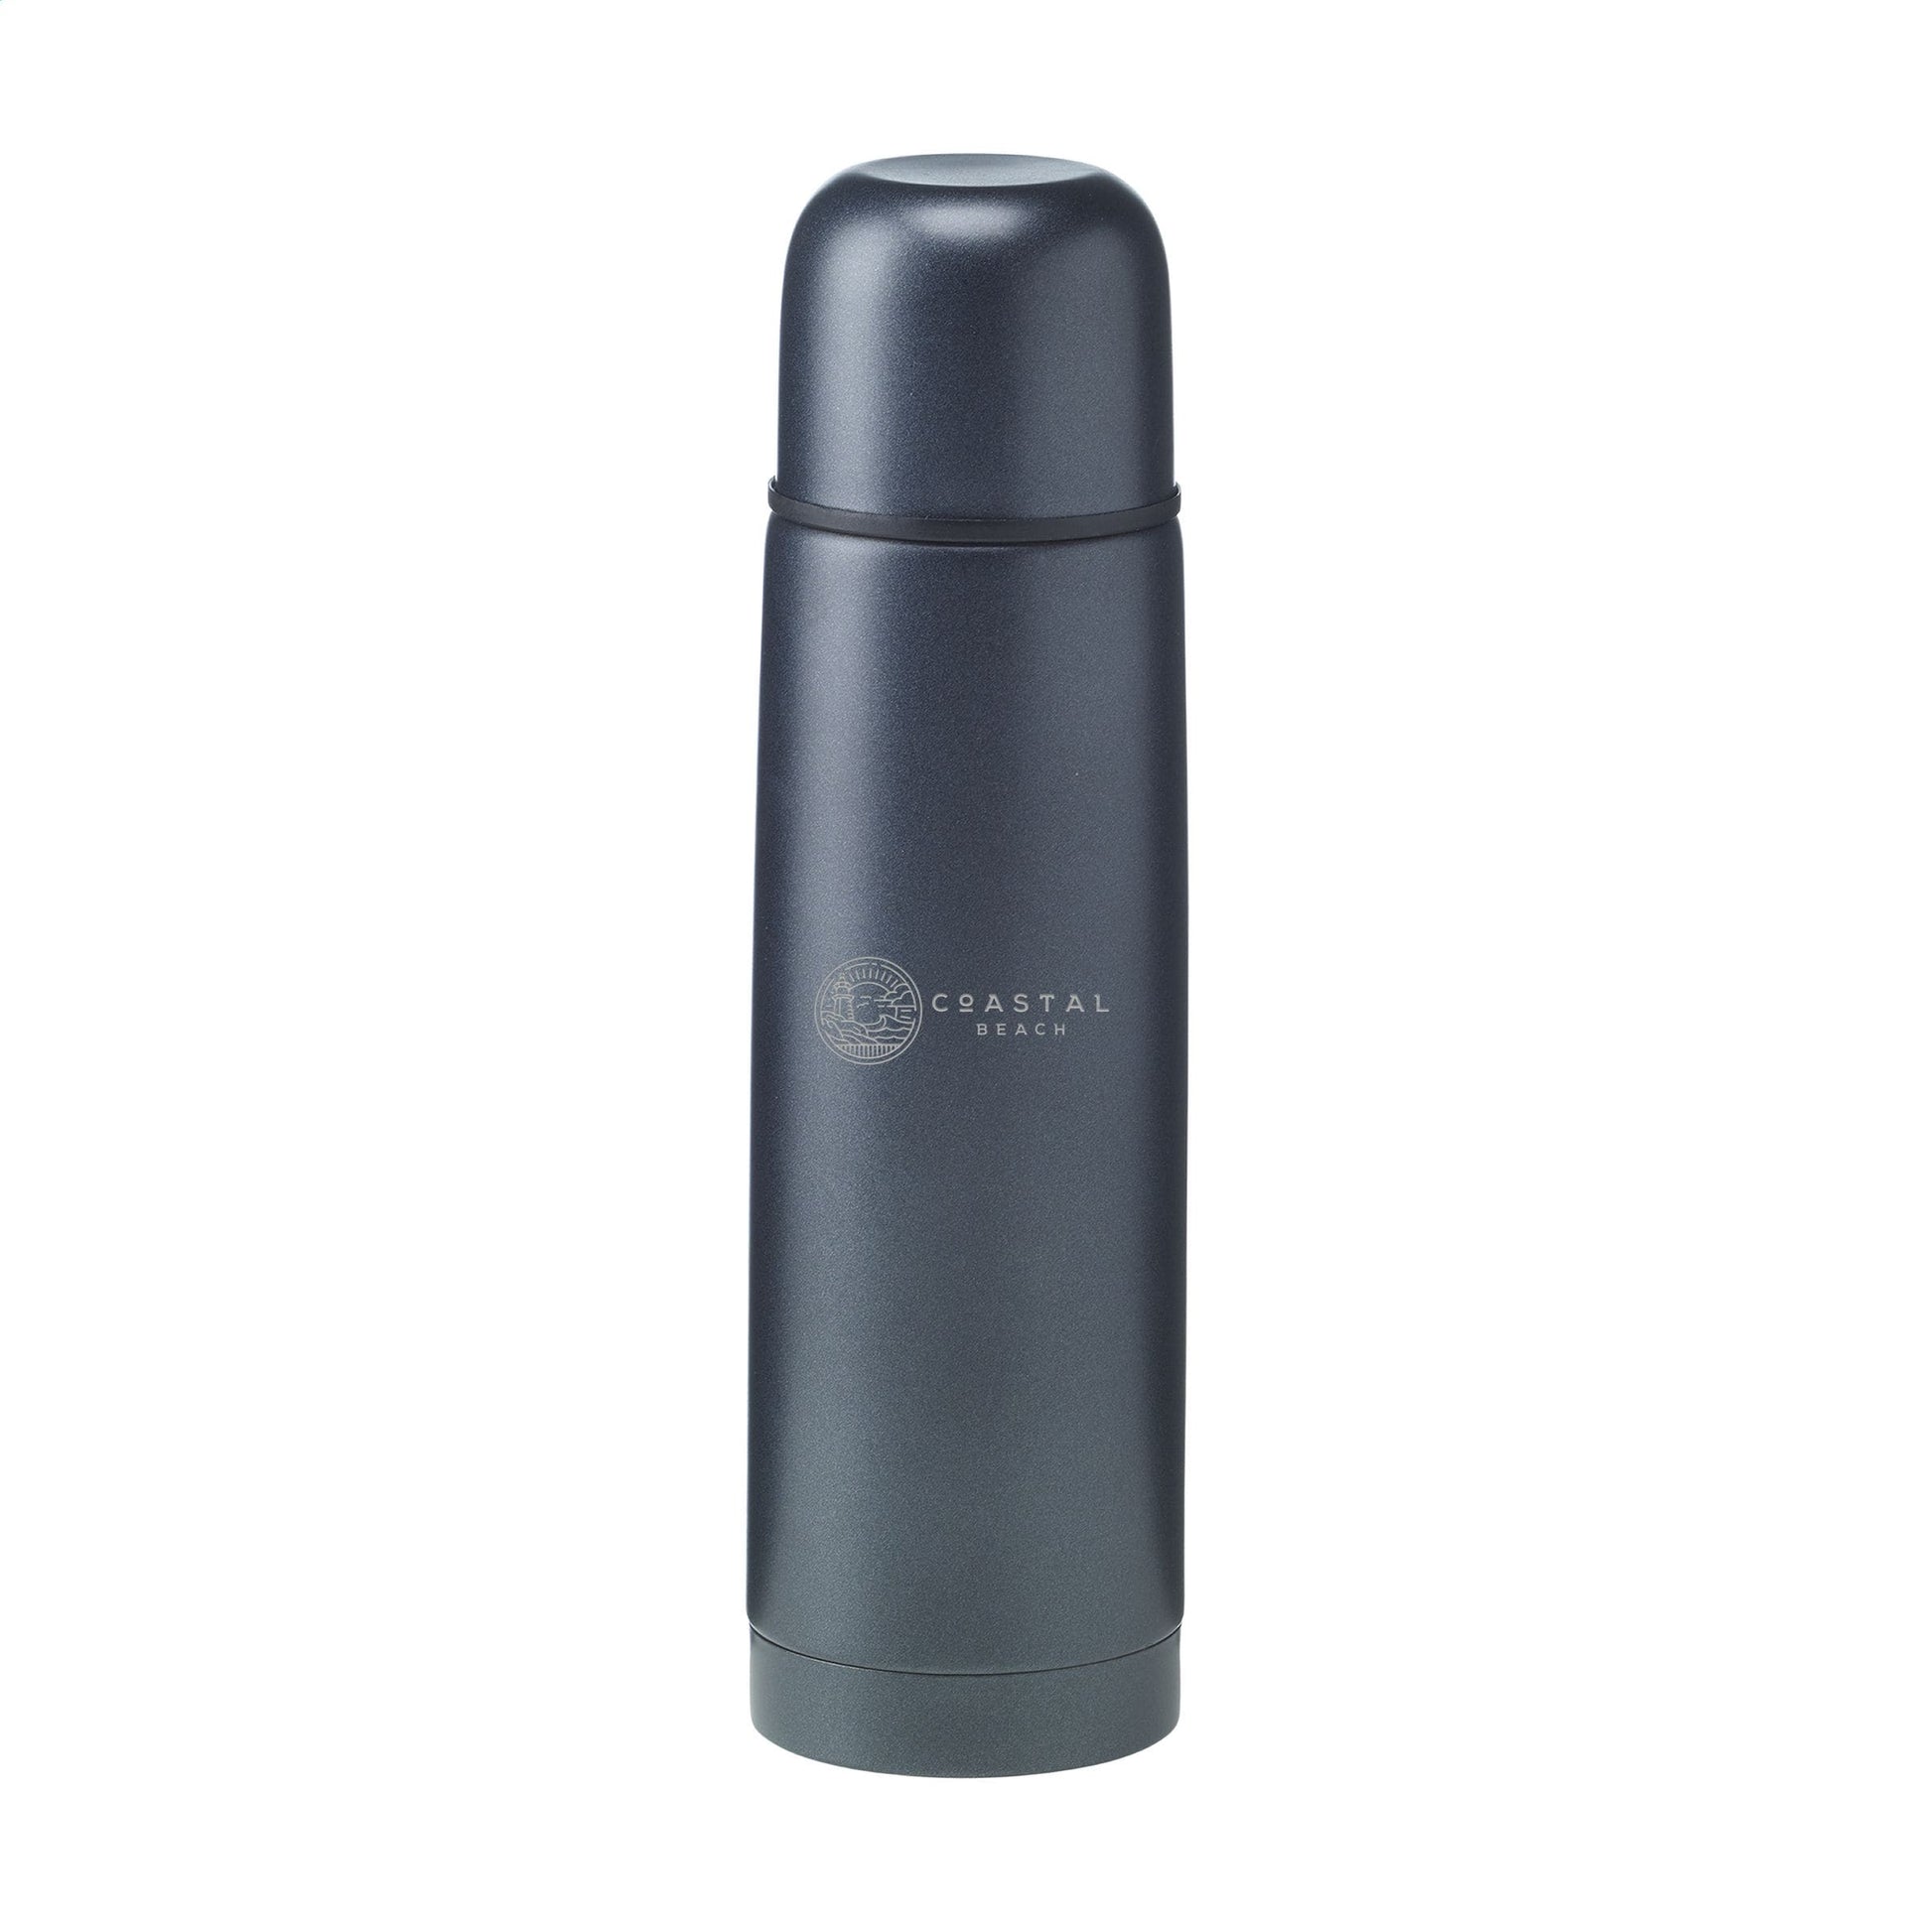 Frosted Bottle 500 ml Thermoflasche - WERBE-WELT.SHOP